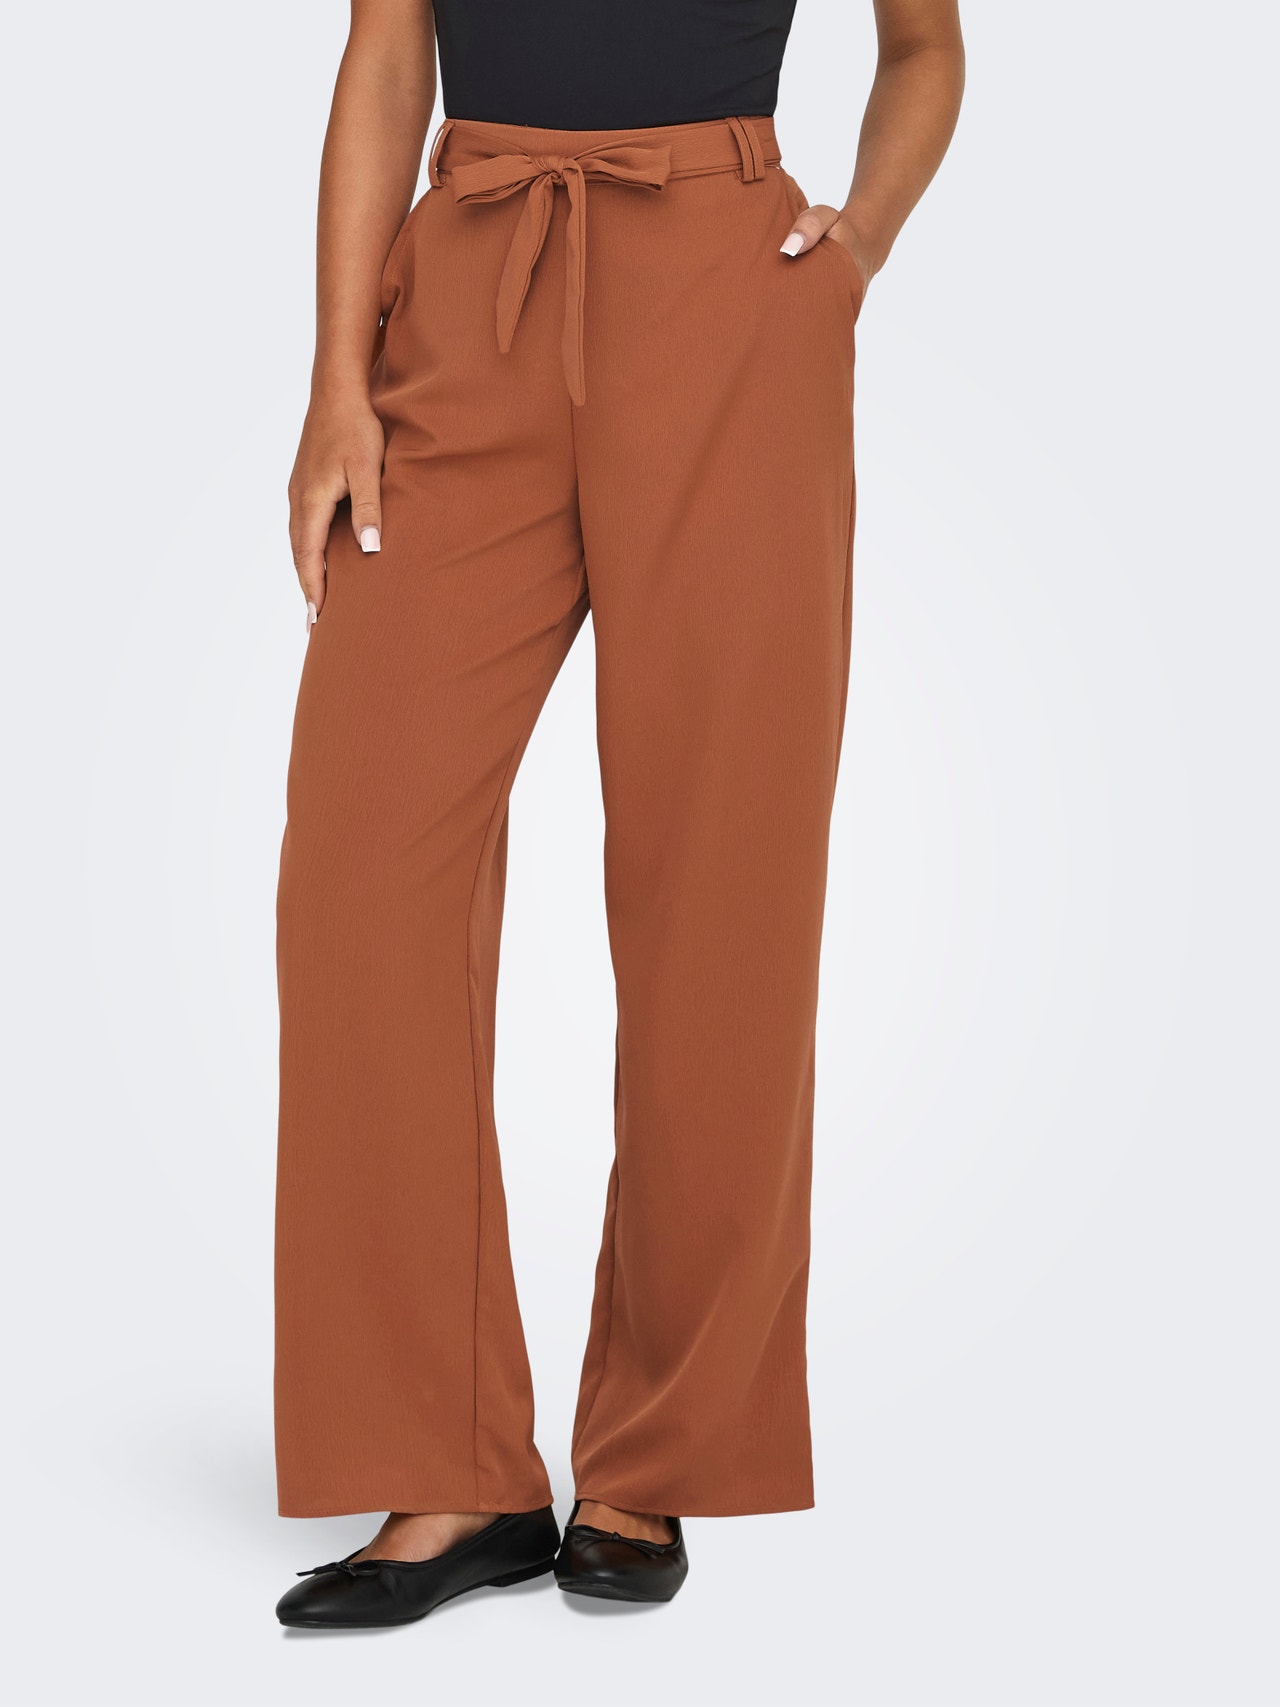 ONLY Trousers with tie belt -Mocha Bisque - 15335560